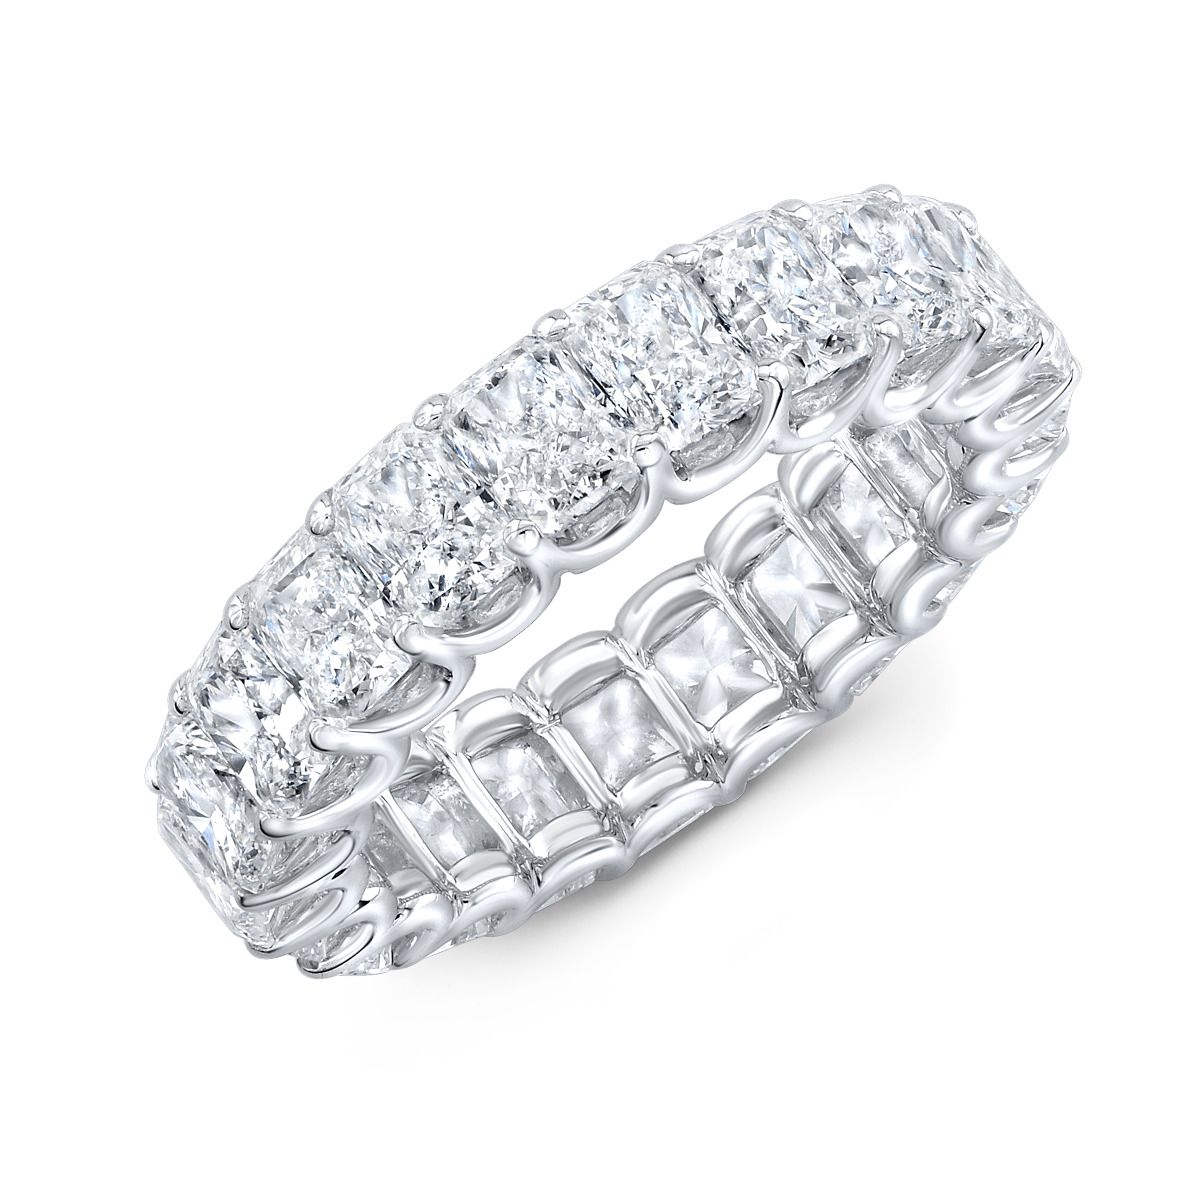 Radiant Cut Diamonds that go all the way around set on this U-Prong Design in White Gold